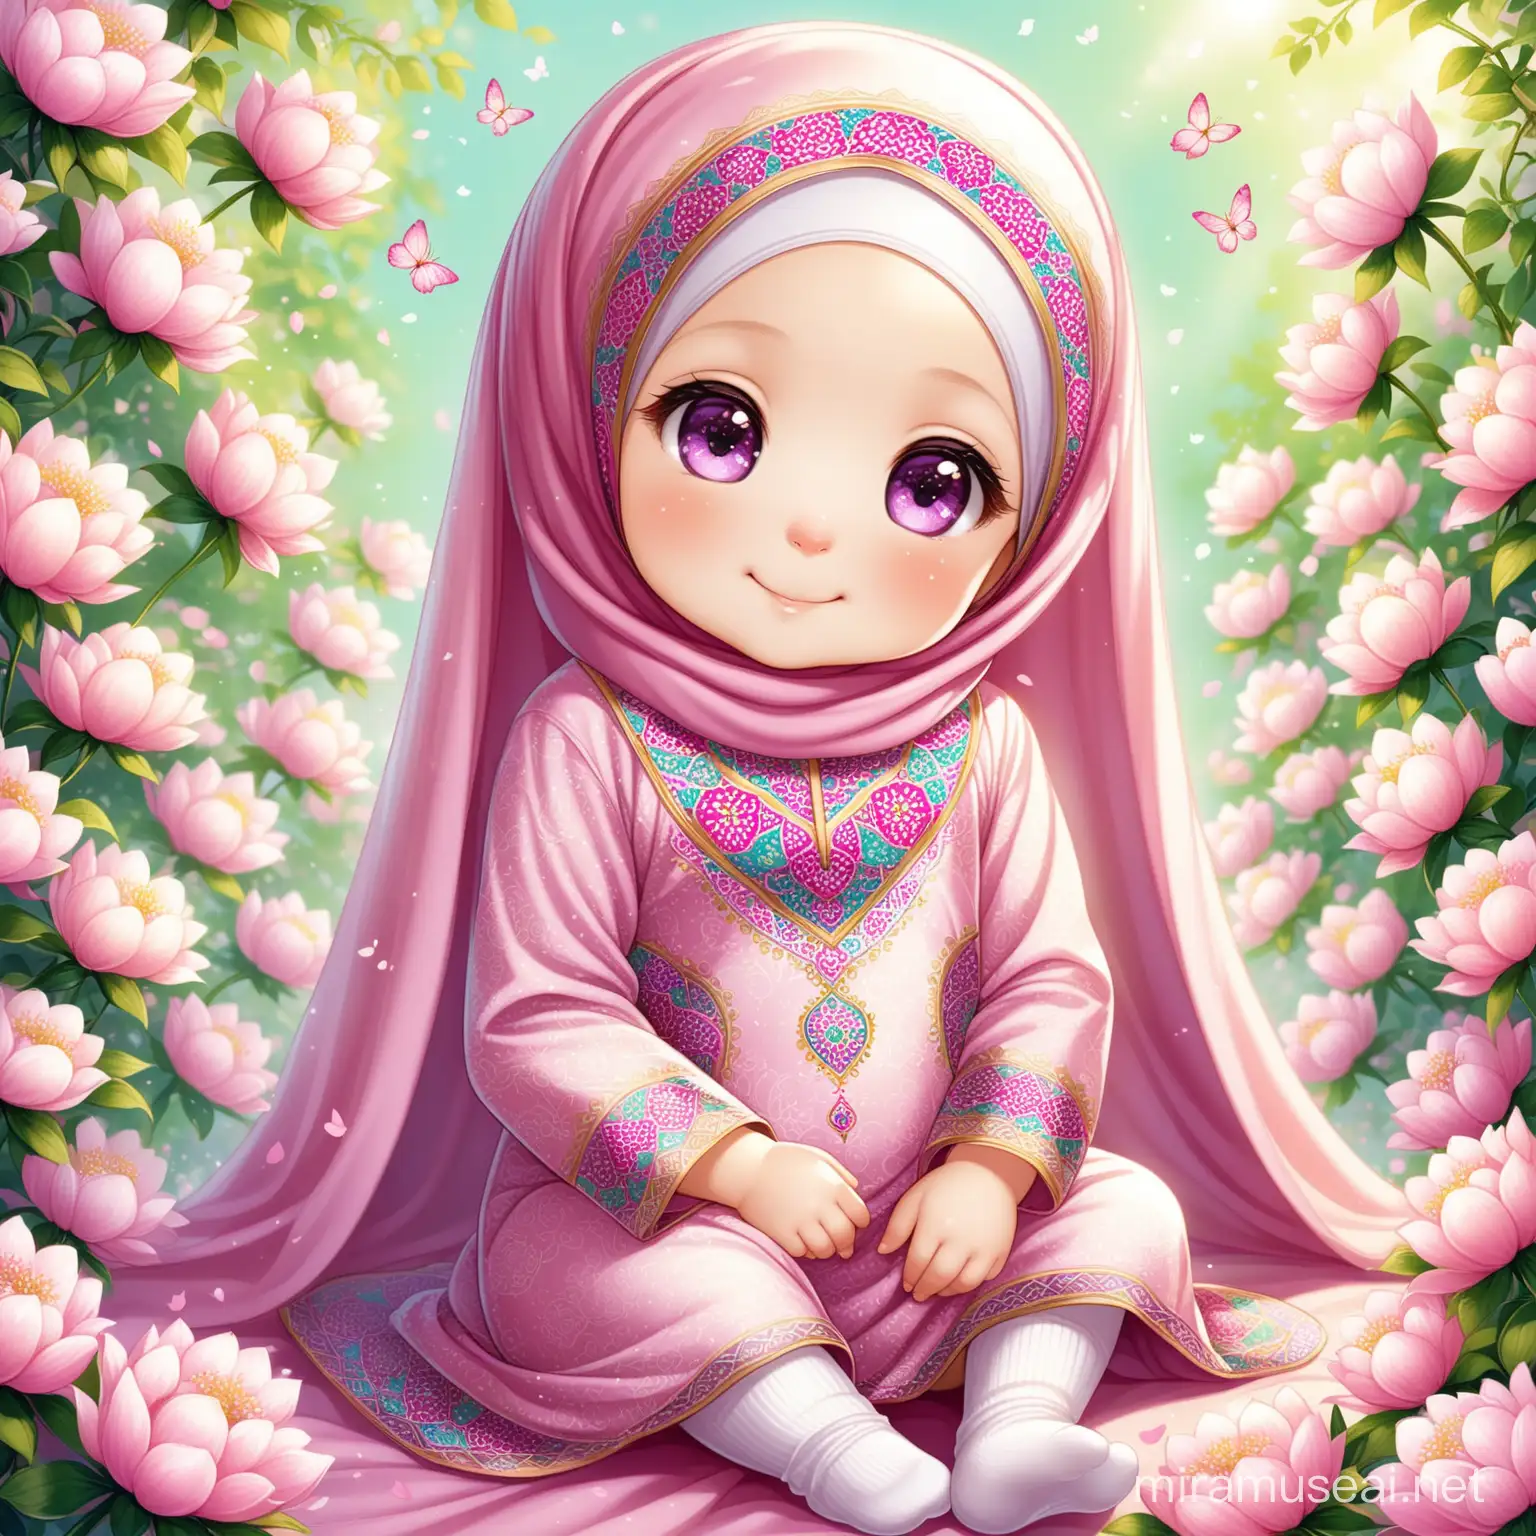 Persian little girl(full height, Muslim, with emphasis no hair out of veil(Hijab), white skin, cute, smiling, baby face, bigger nose, smaller eyes, wearing socks, clothes full of Persian designs).
Atmosphere full of many pink flowers, spring.